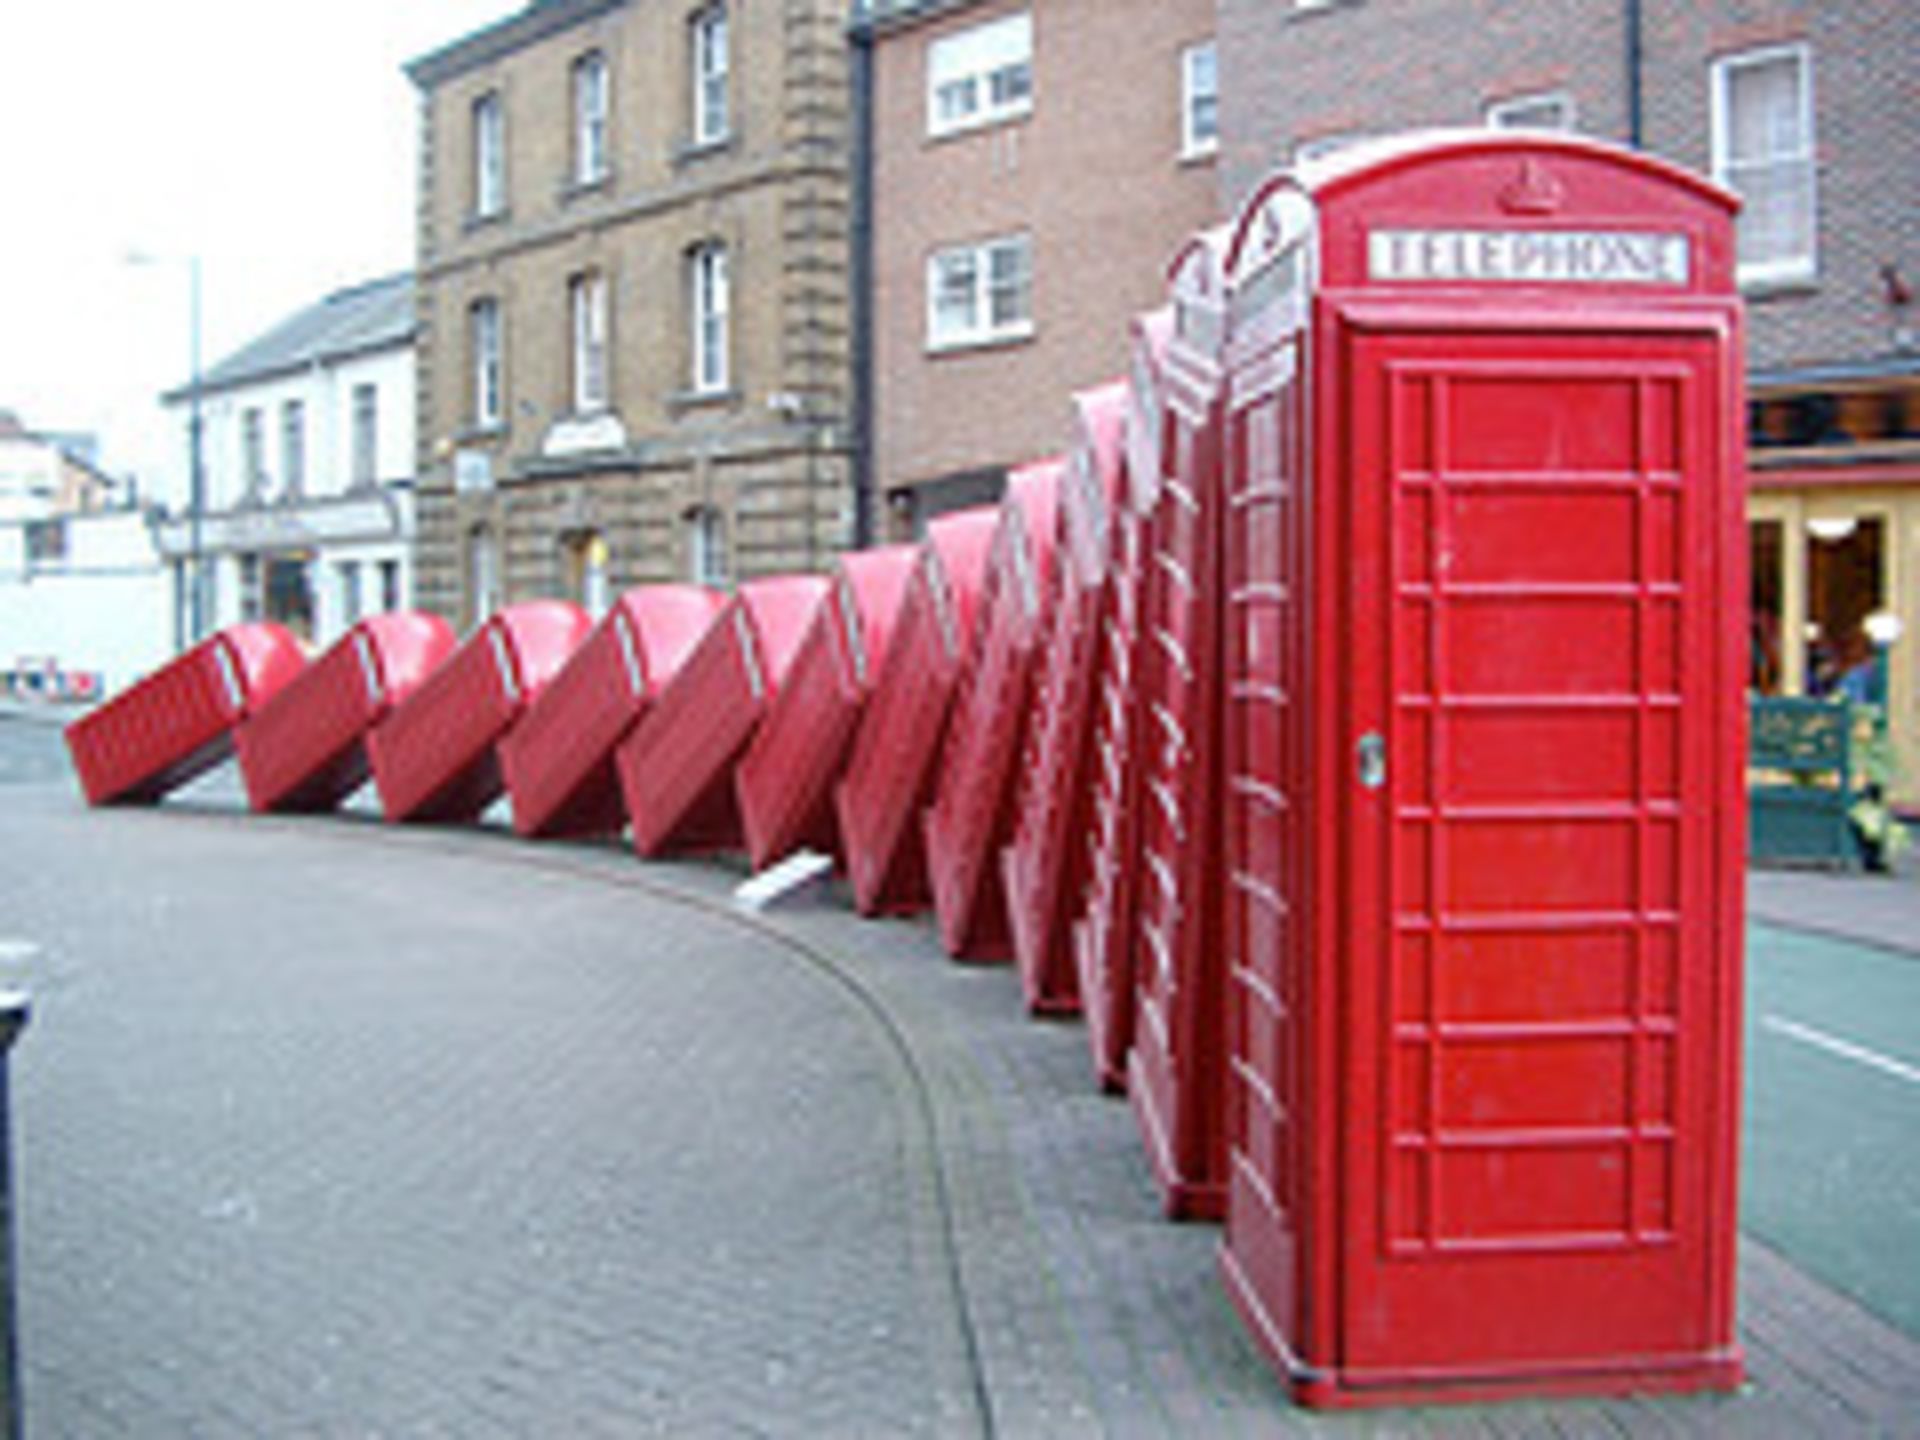 V Grade A Canvas Print Of Kingston Phone Box 60 x 40 cms X 2 YOUR BID PRICE TO BE MULTIPLIED BY TWO